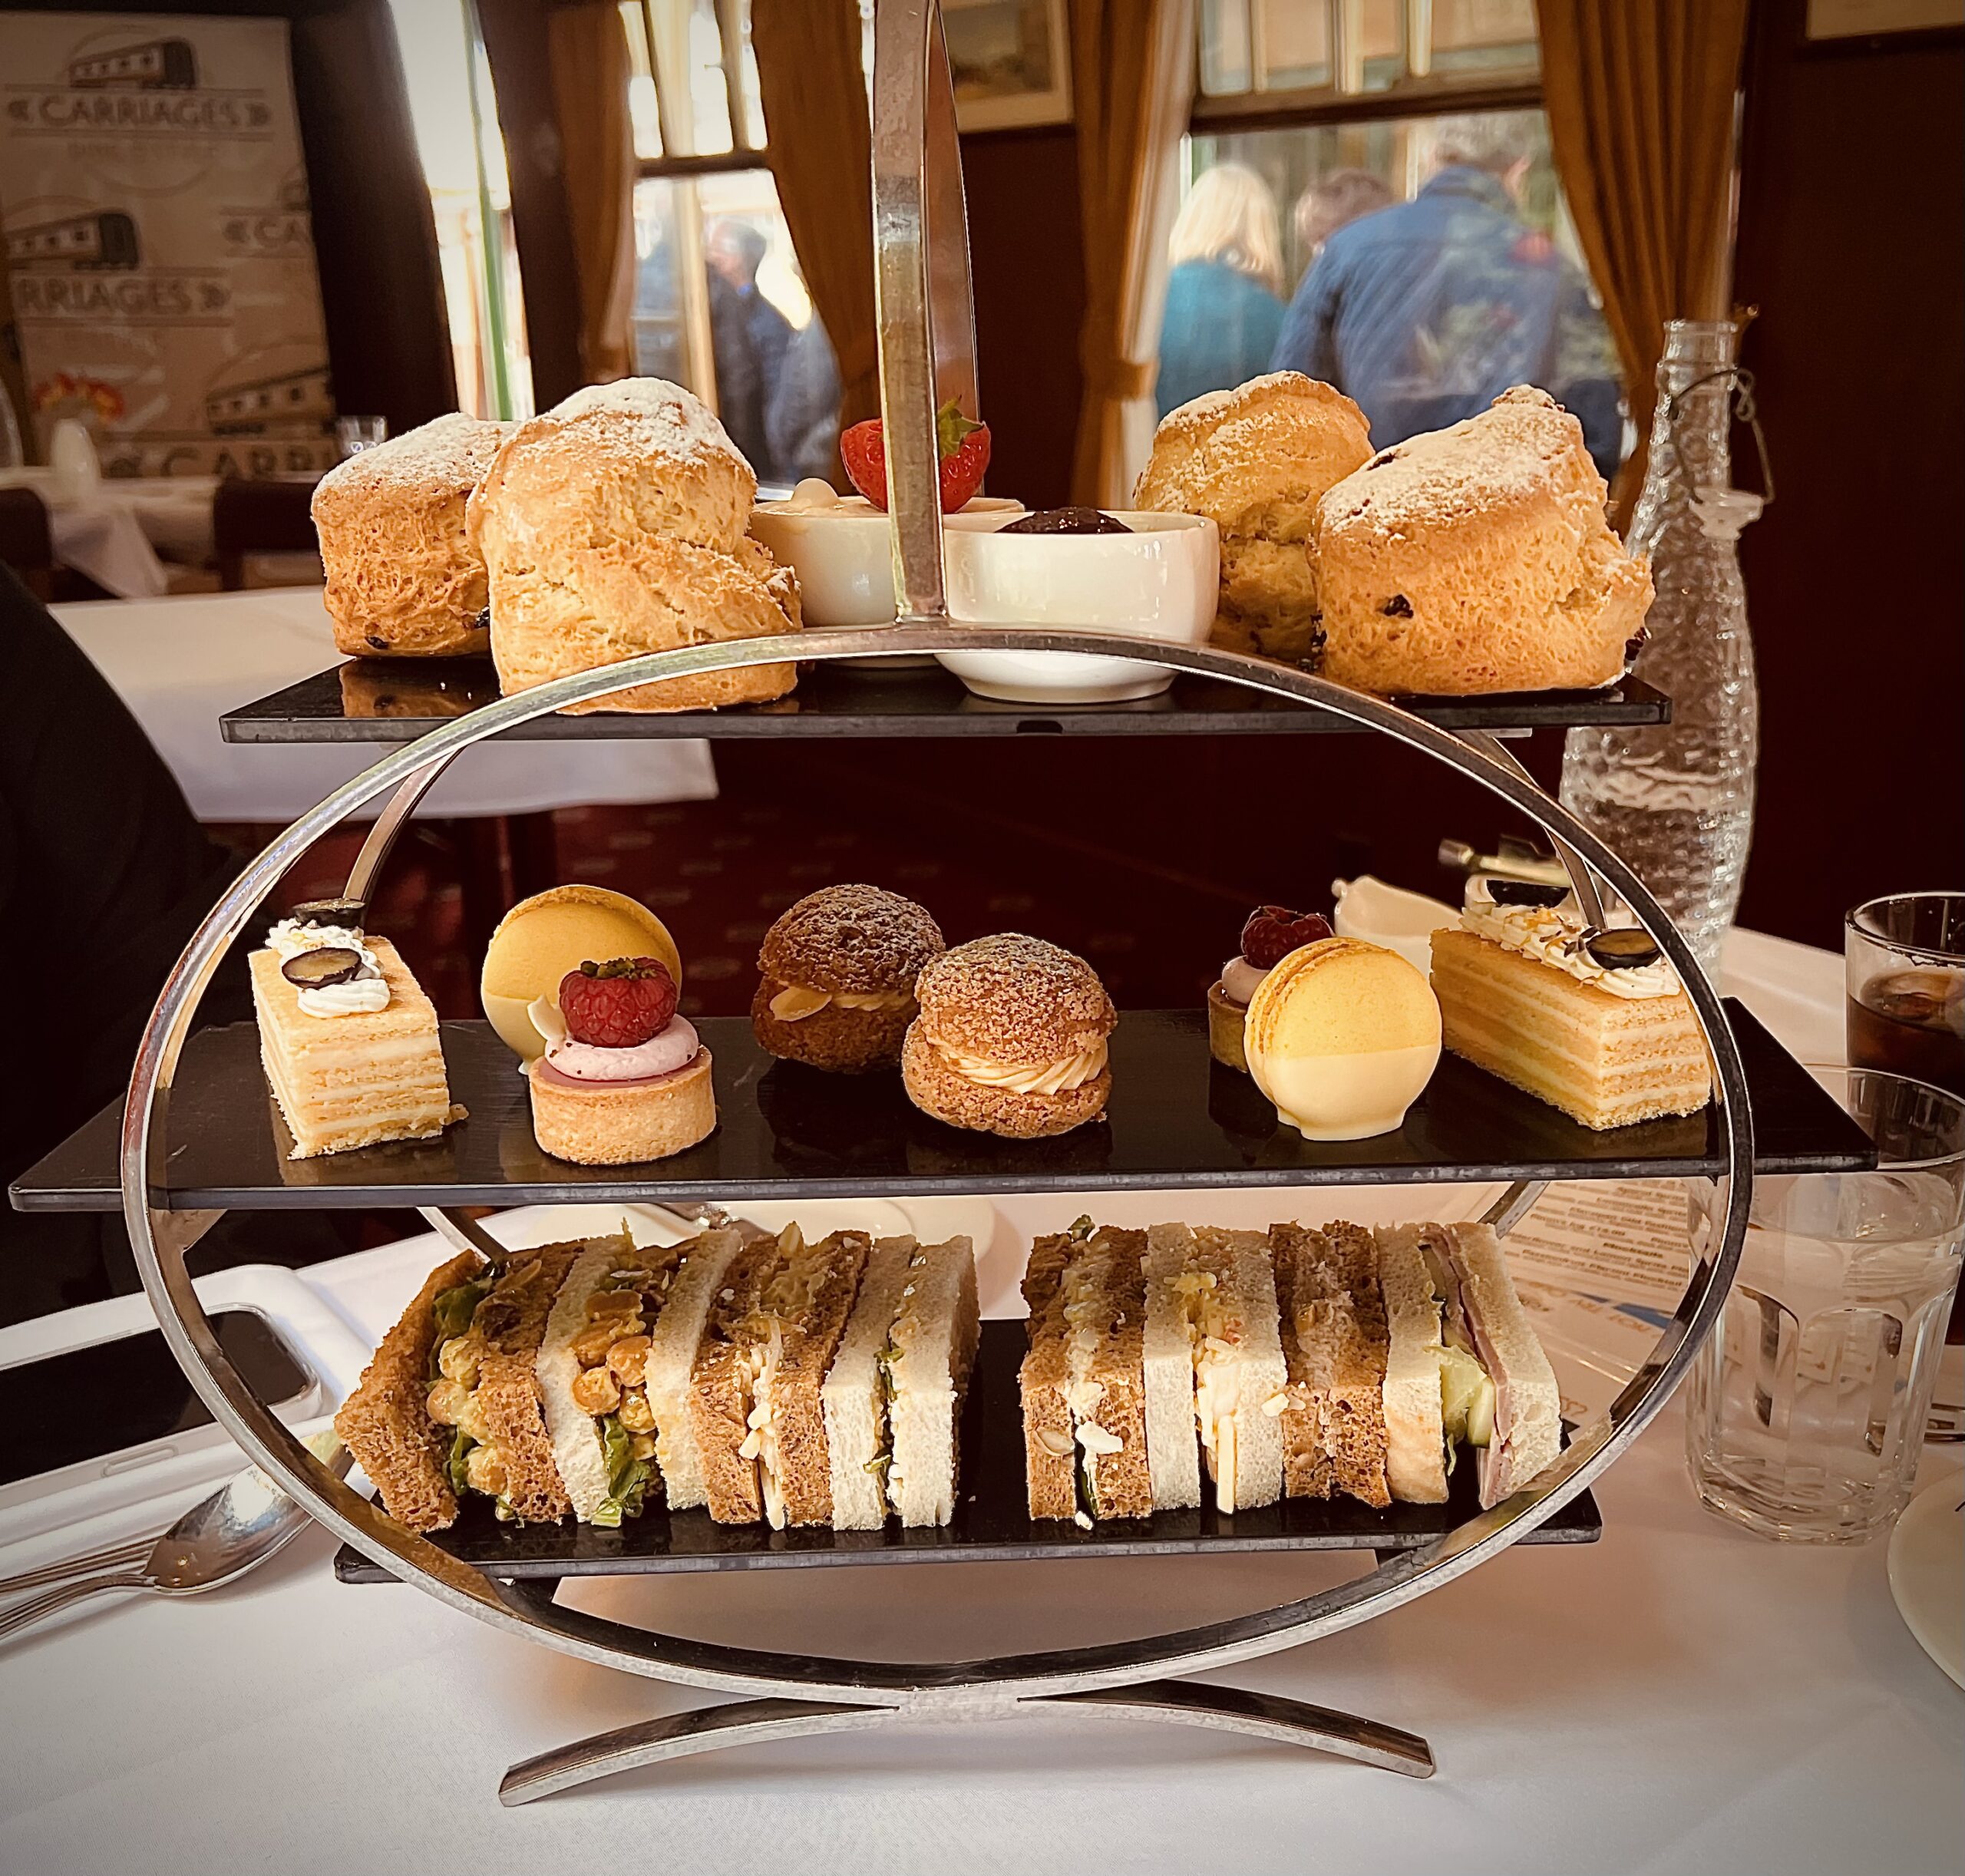 Vegetarian Meals Out in April – Toby Carvery and Carriages Afternoon Tea